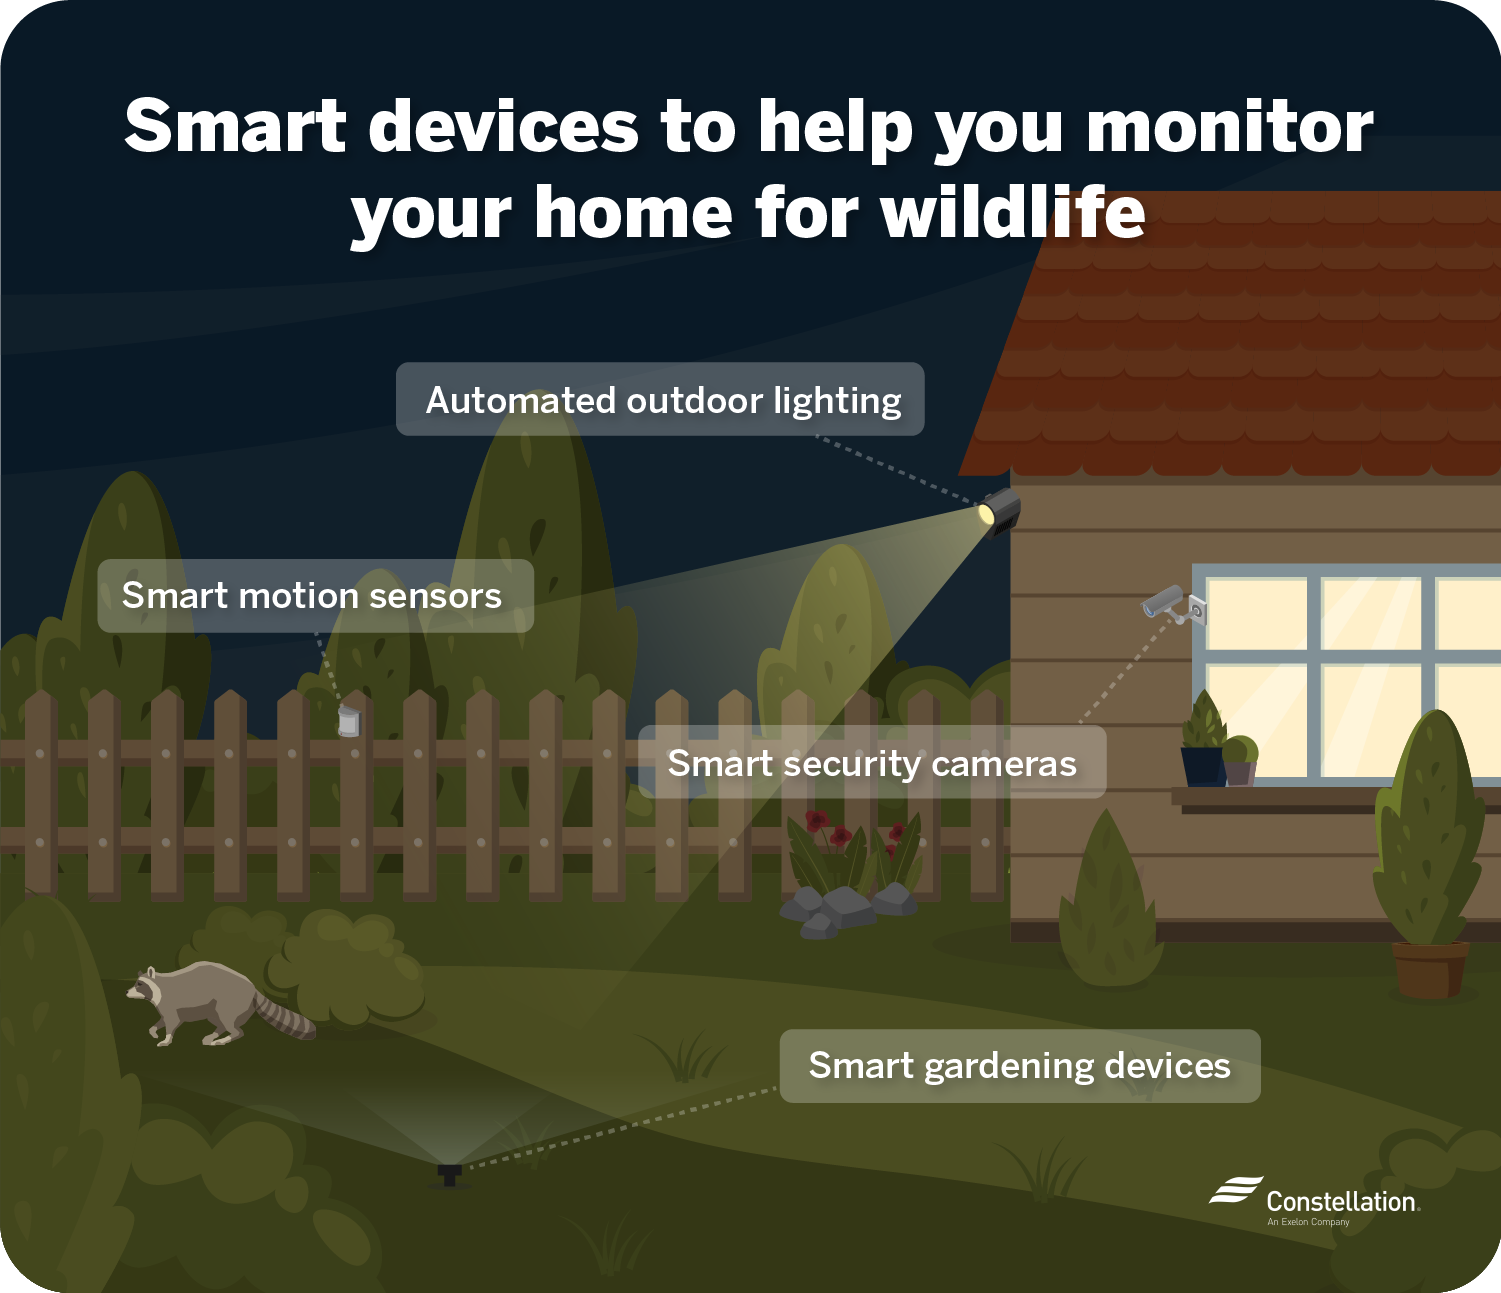 Smart devices to help you monitor your home for wildlife